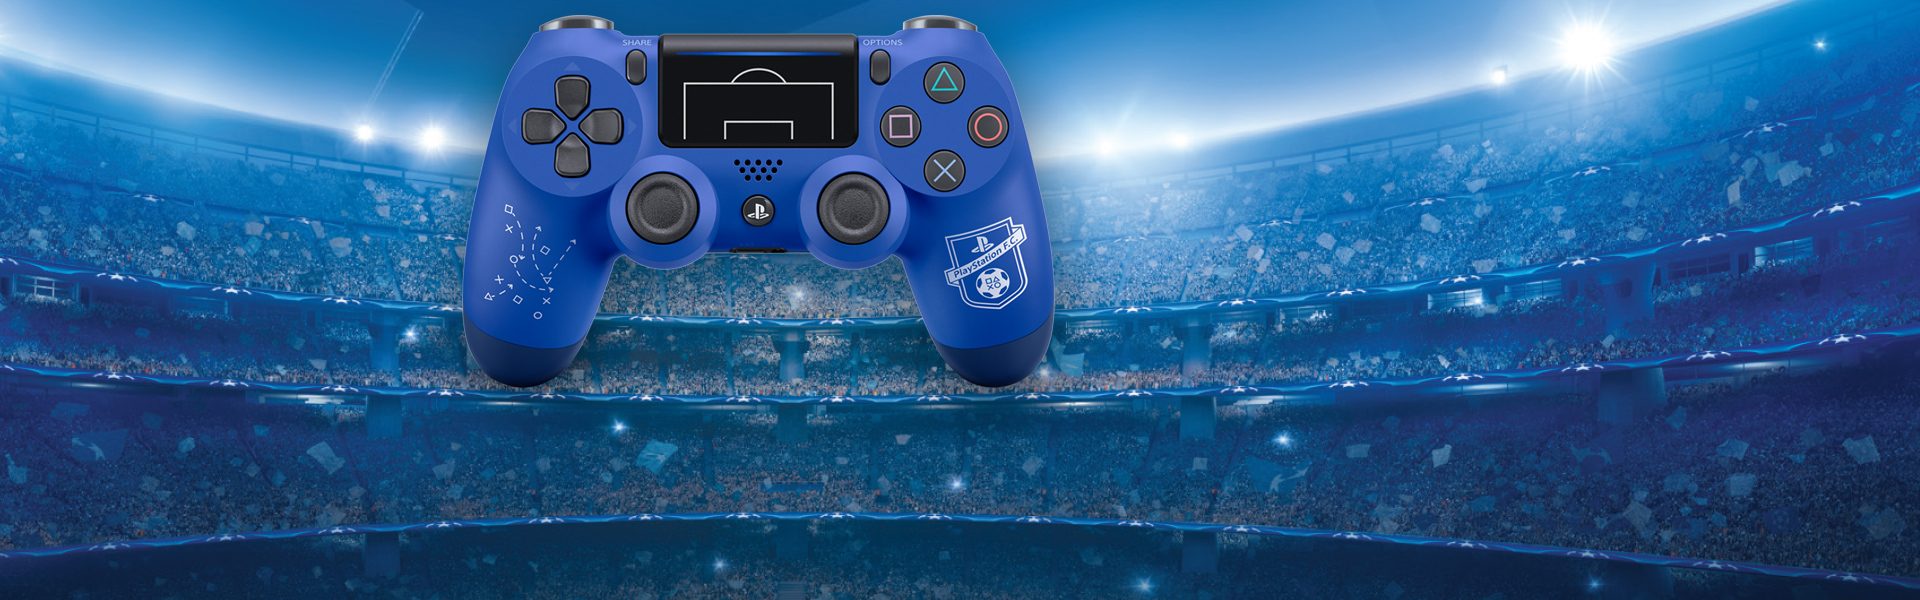 ps4 controller champions league edition